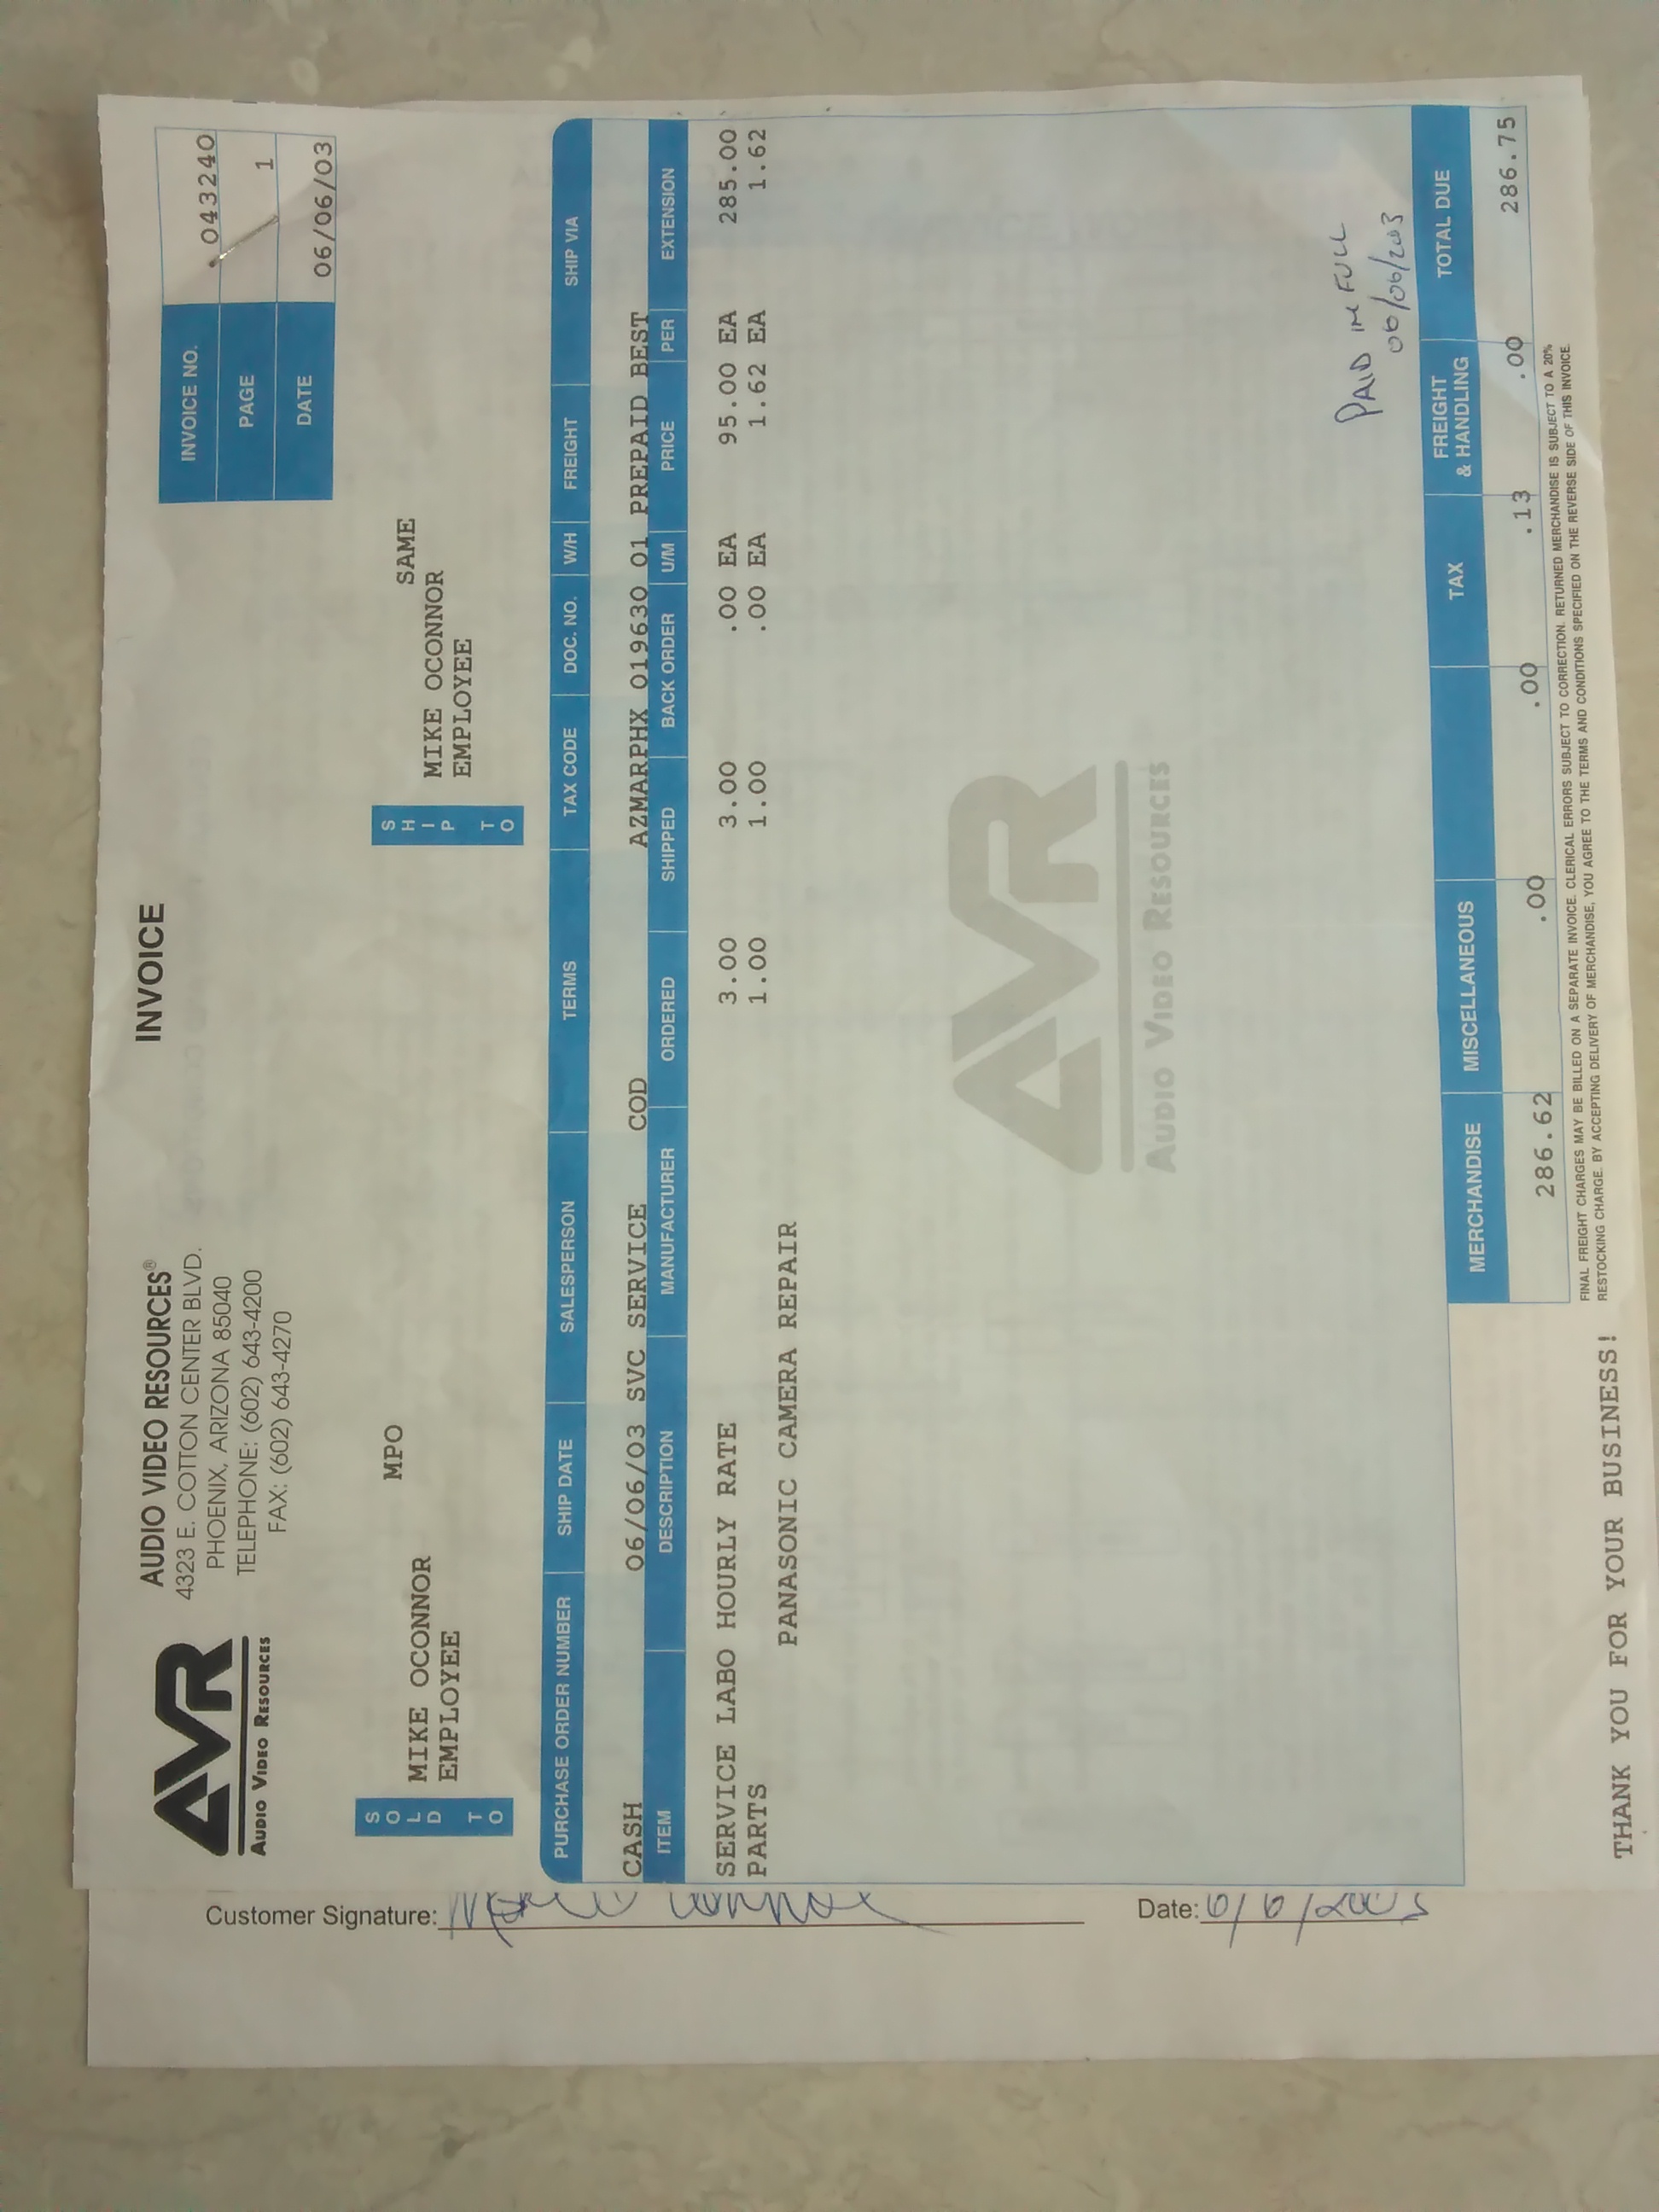 This is a picture of the actual Invoice.